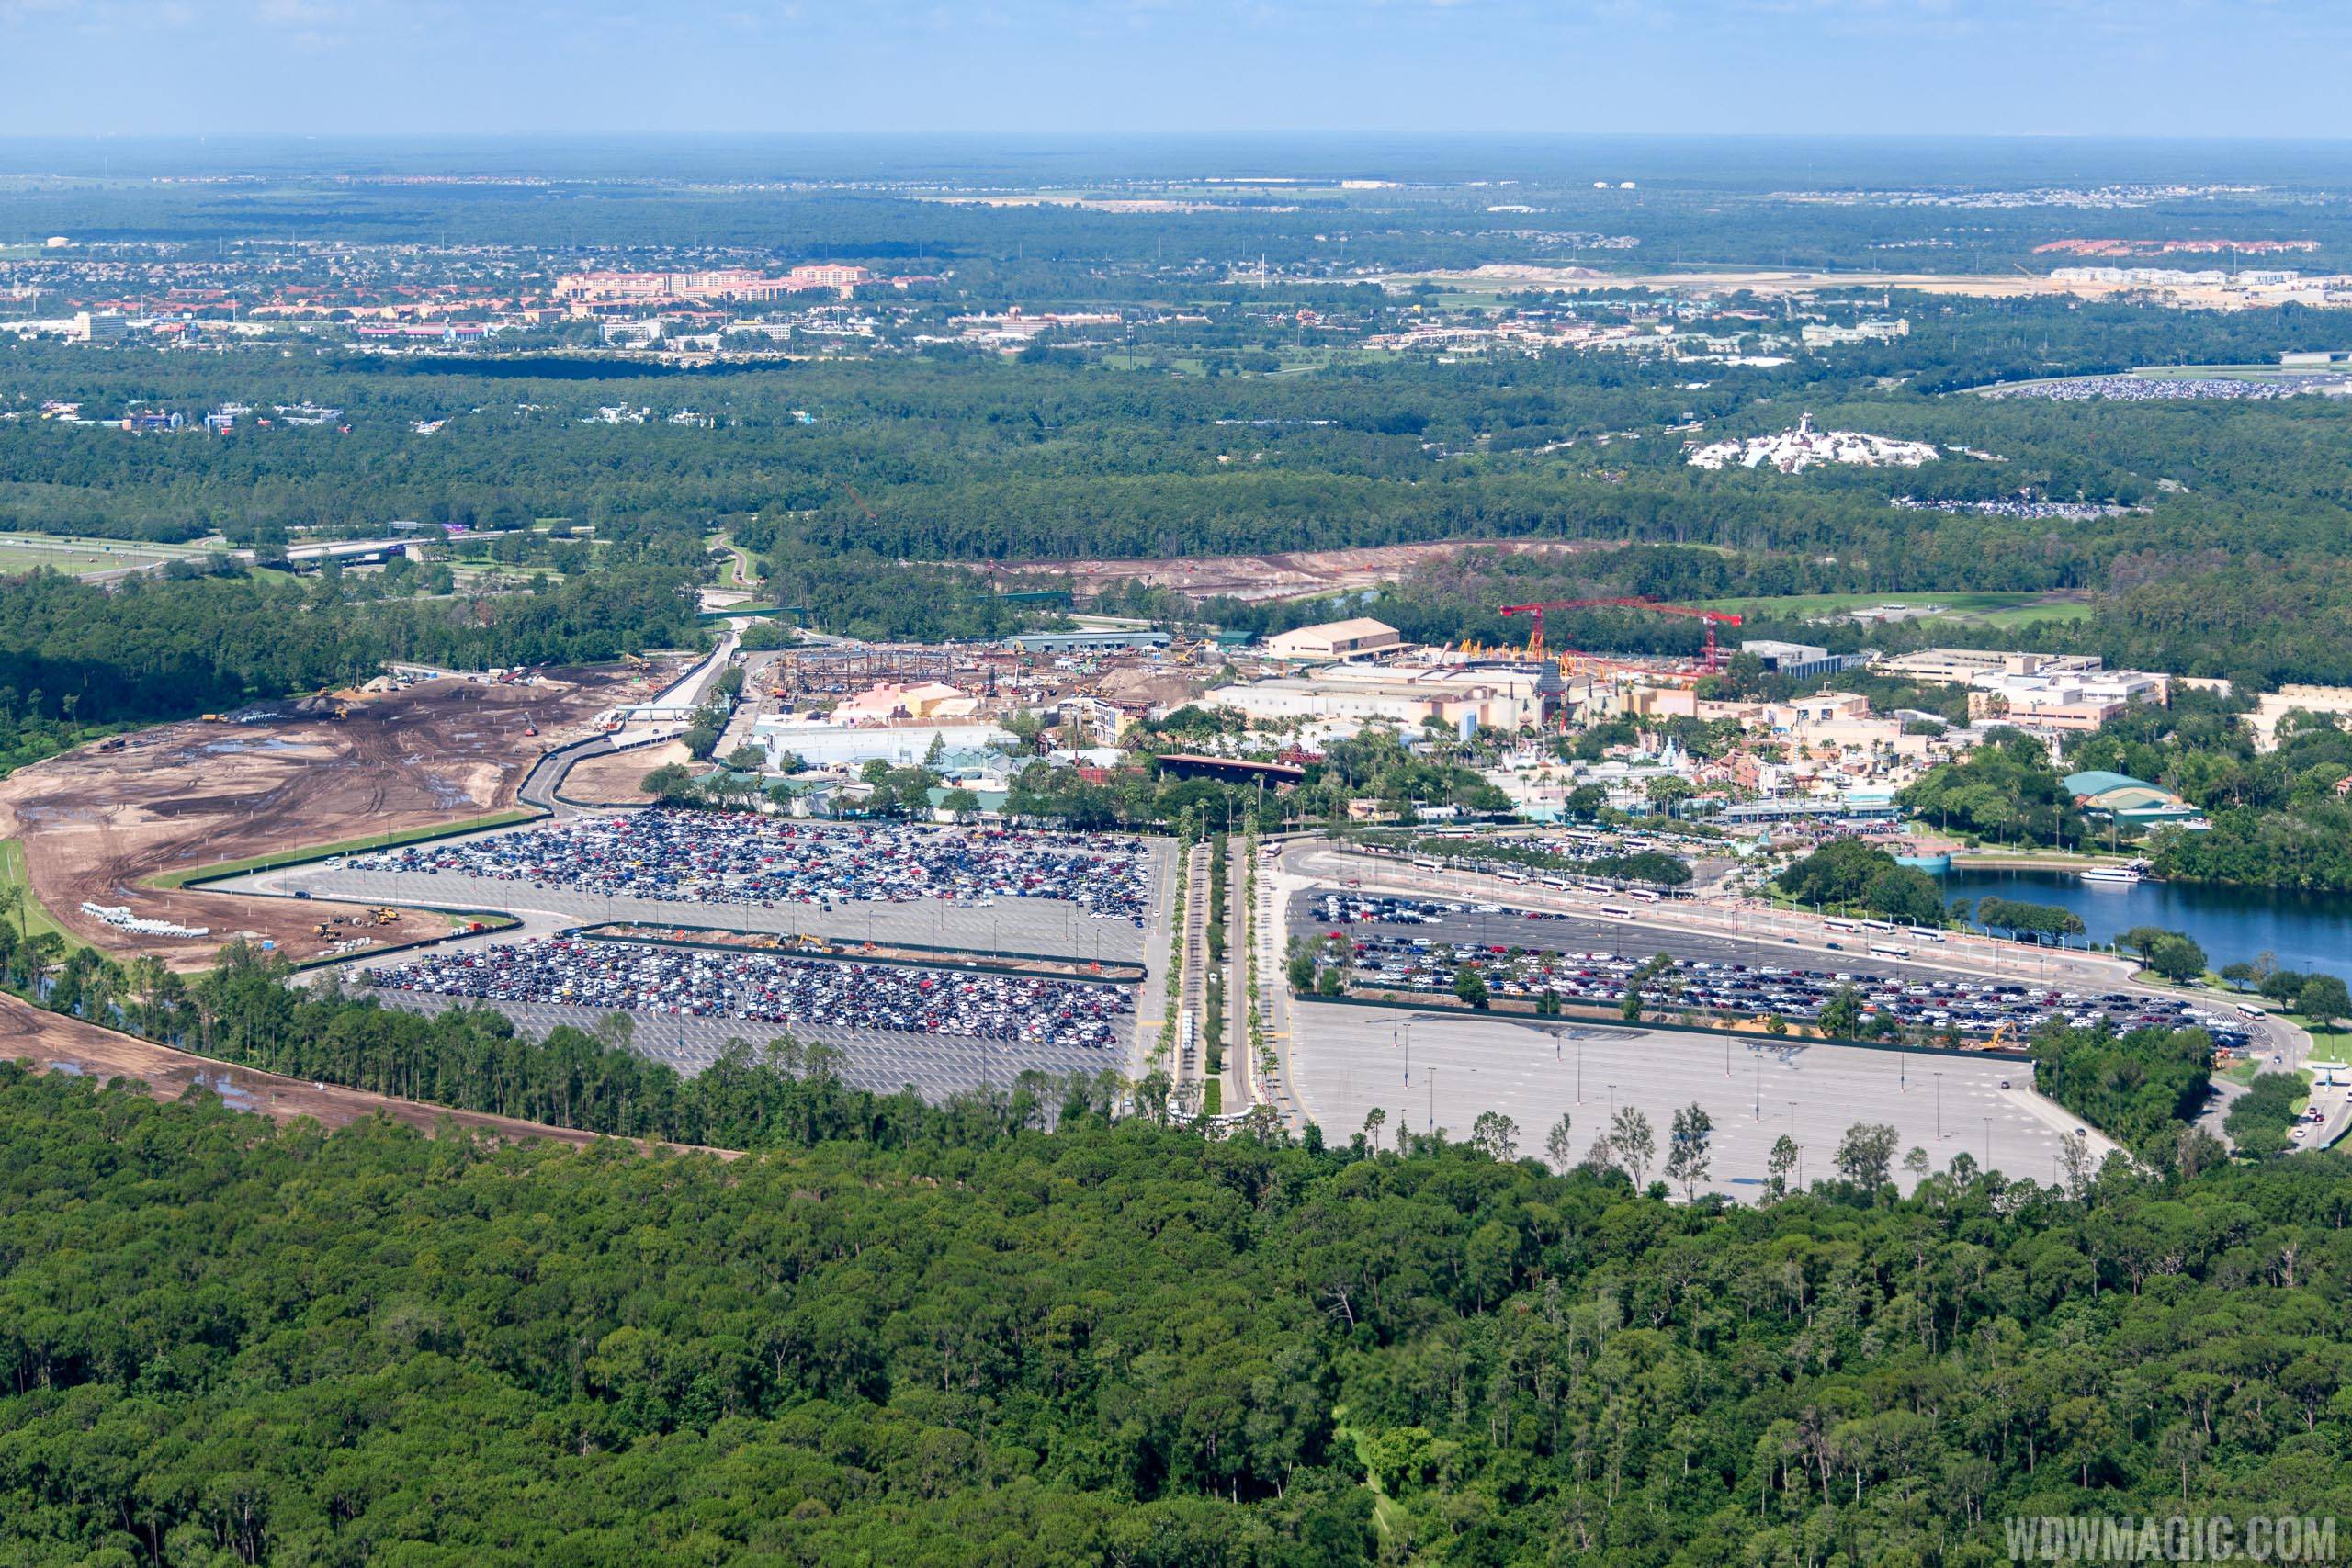 Aerial views of new entrance and roadways at Disney's Hollywood Studios